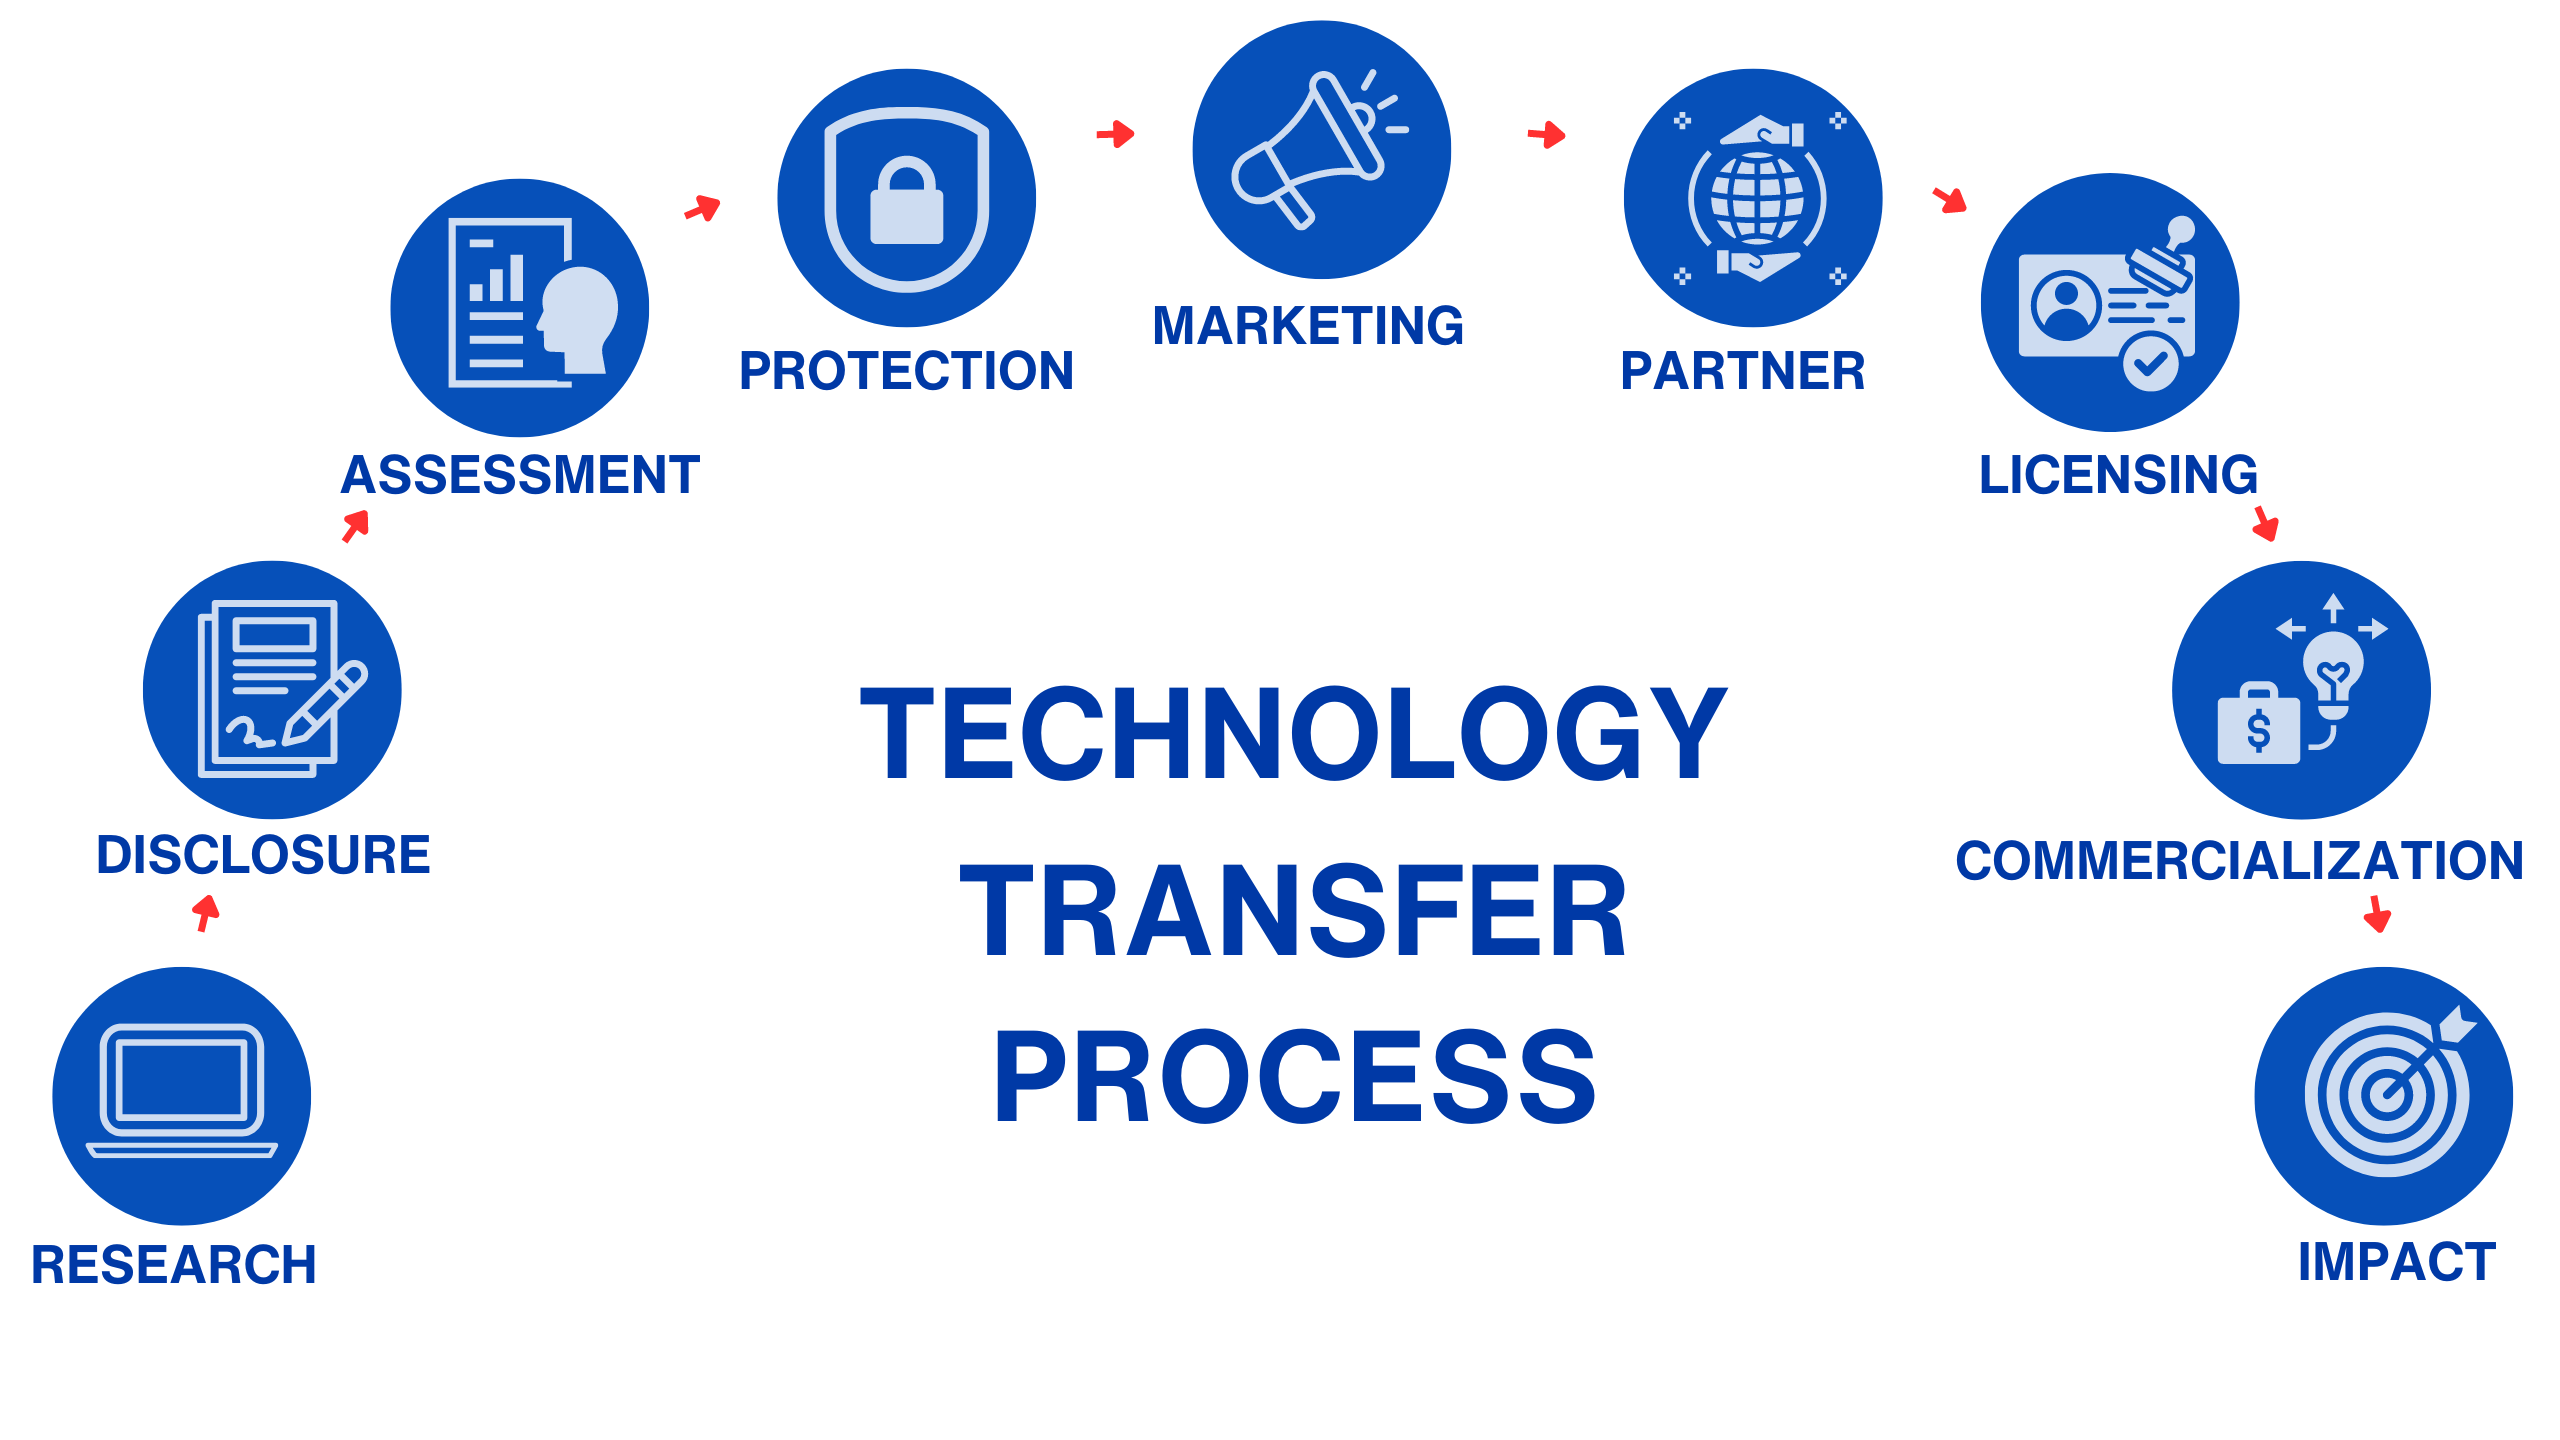 Description of technology transfer process, from research and disclosure to commercialization and impact.